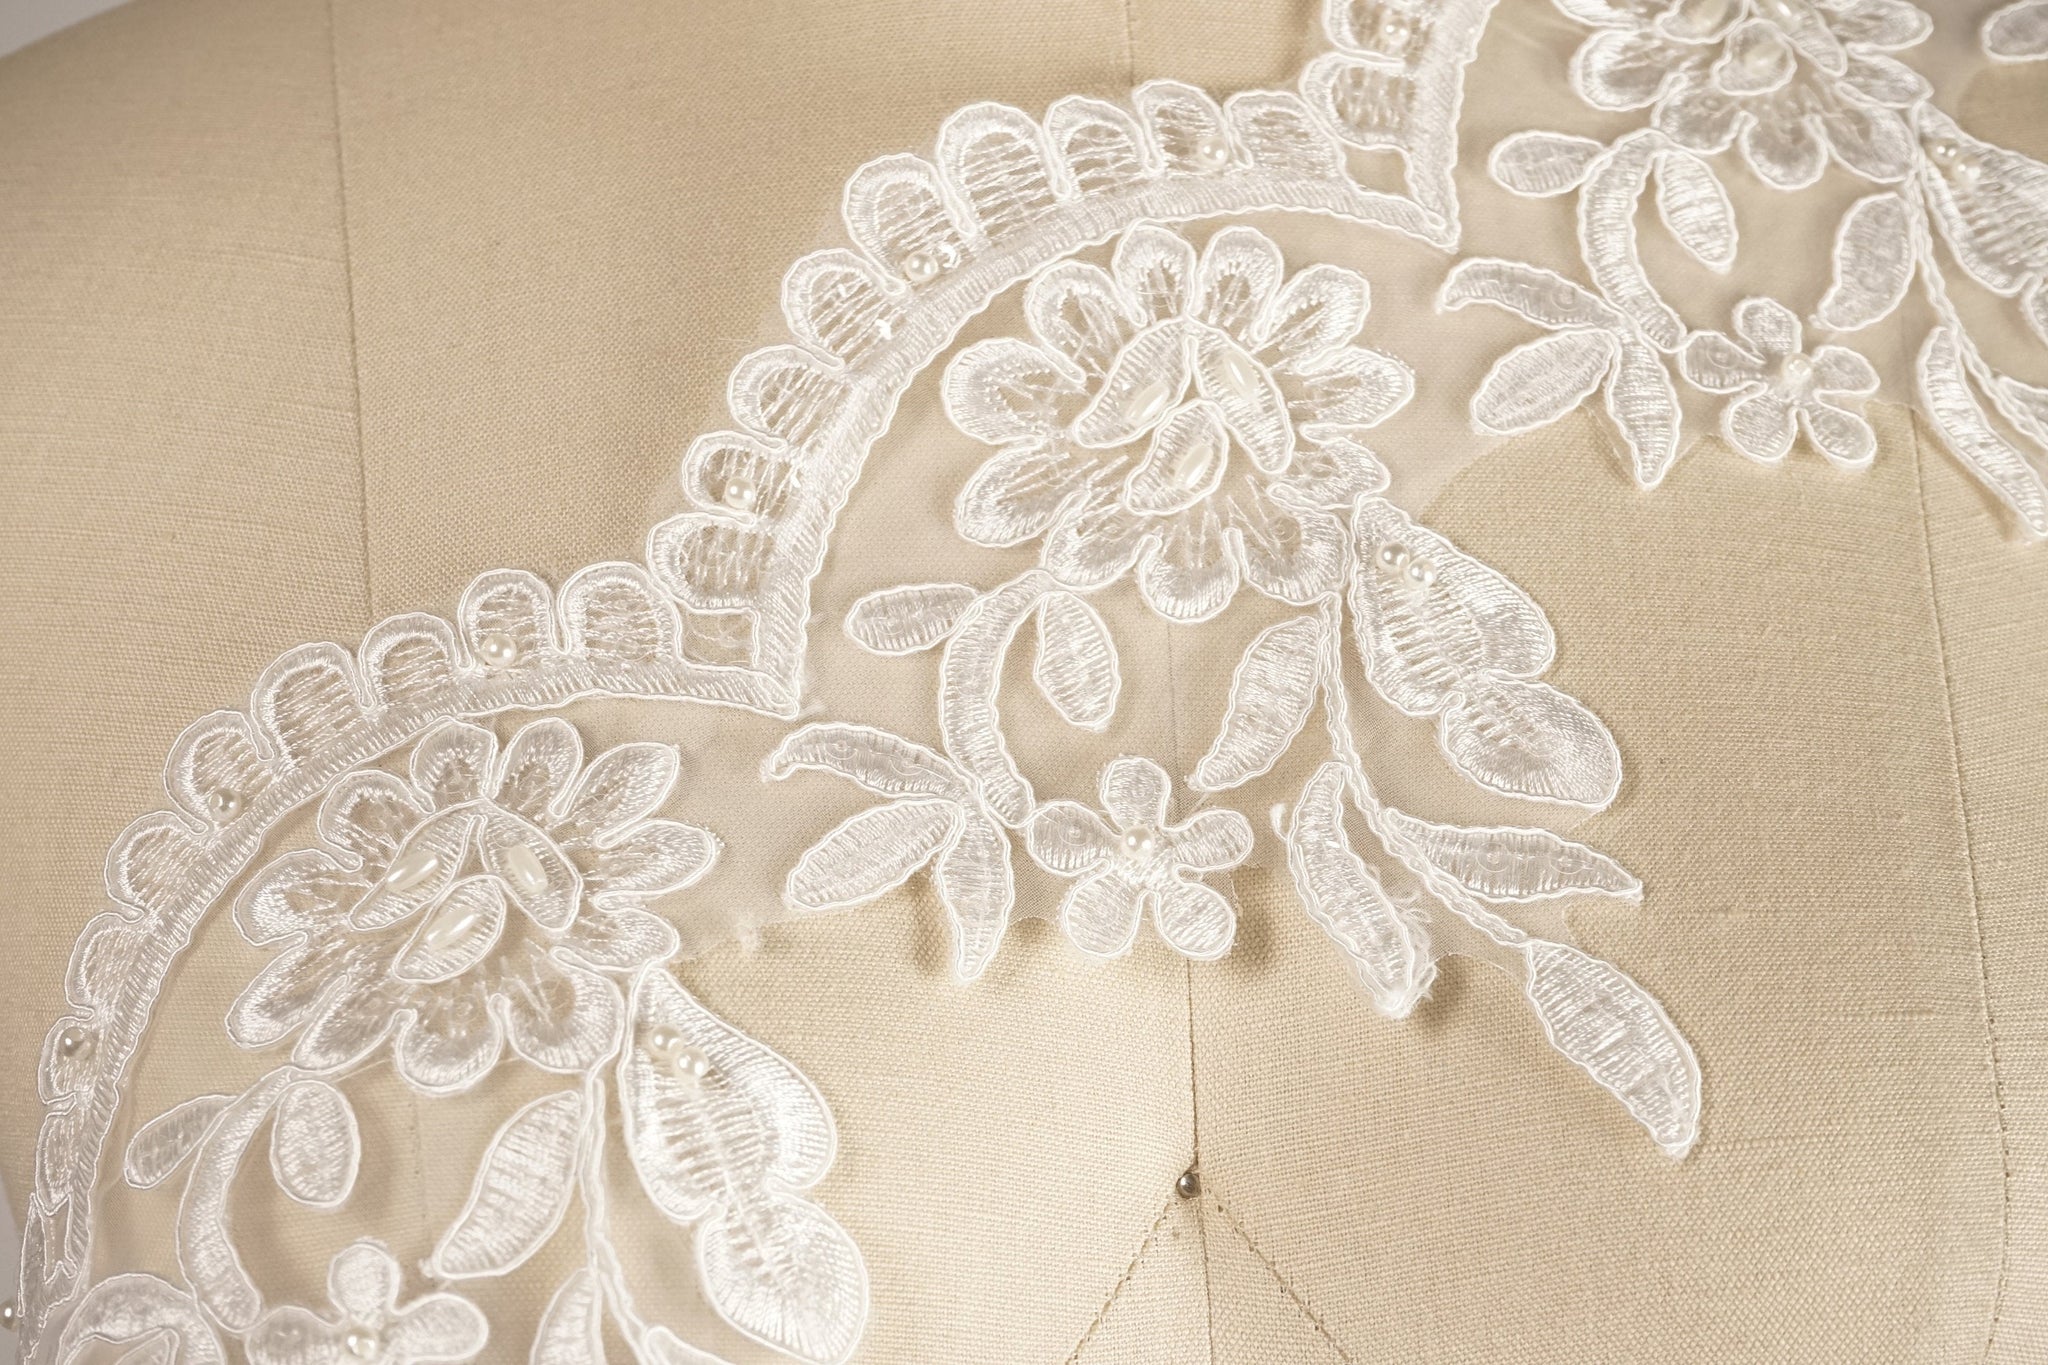 1 Yard 6" or 4" White and Gold Beading Descending Leafs Large Rose Bridal Veil Scalloped Lace Trim